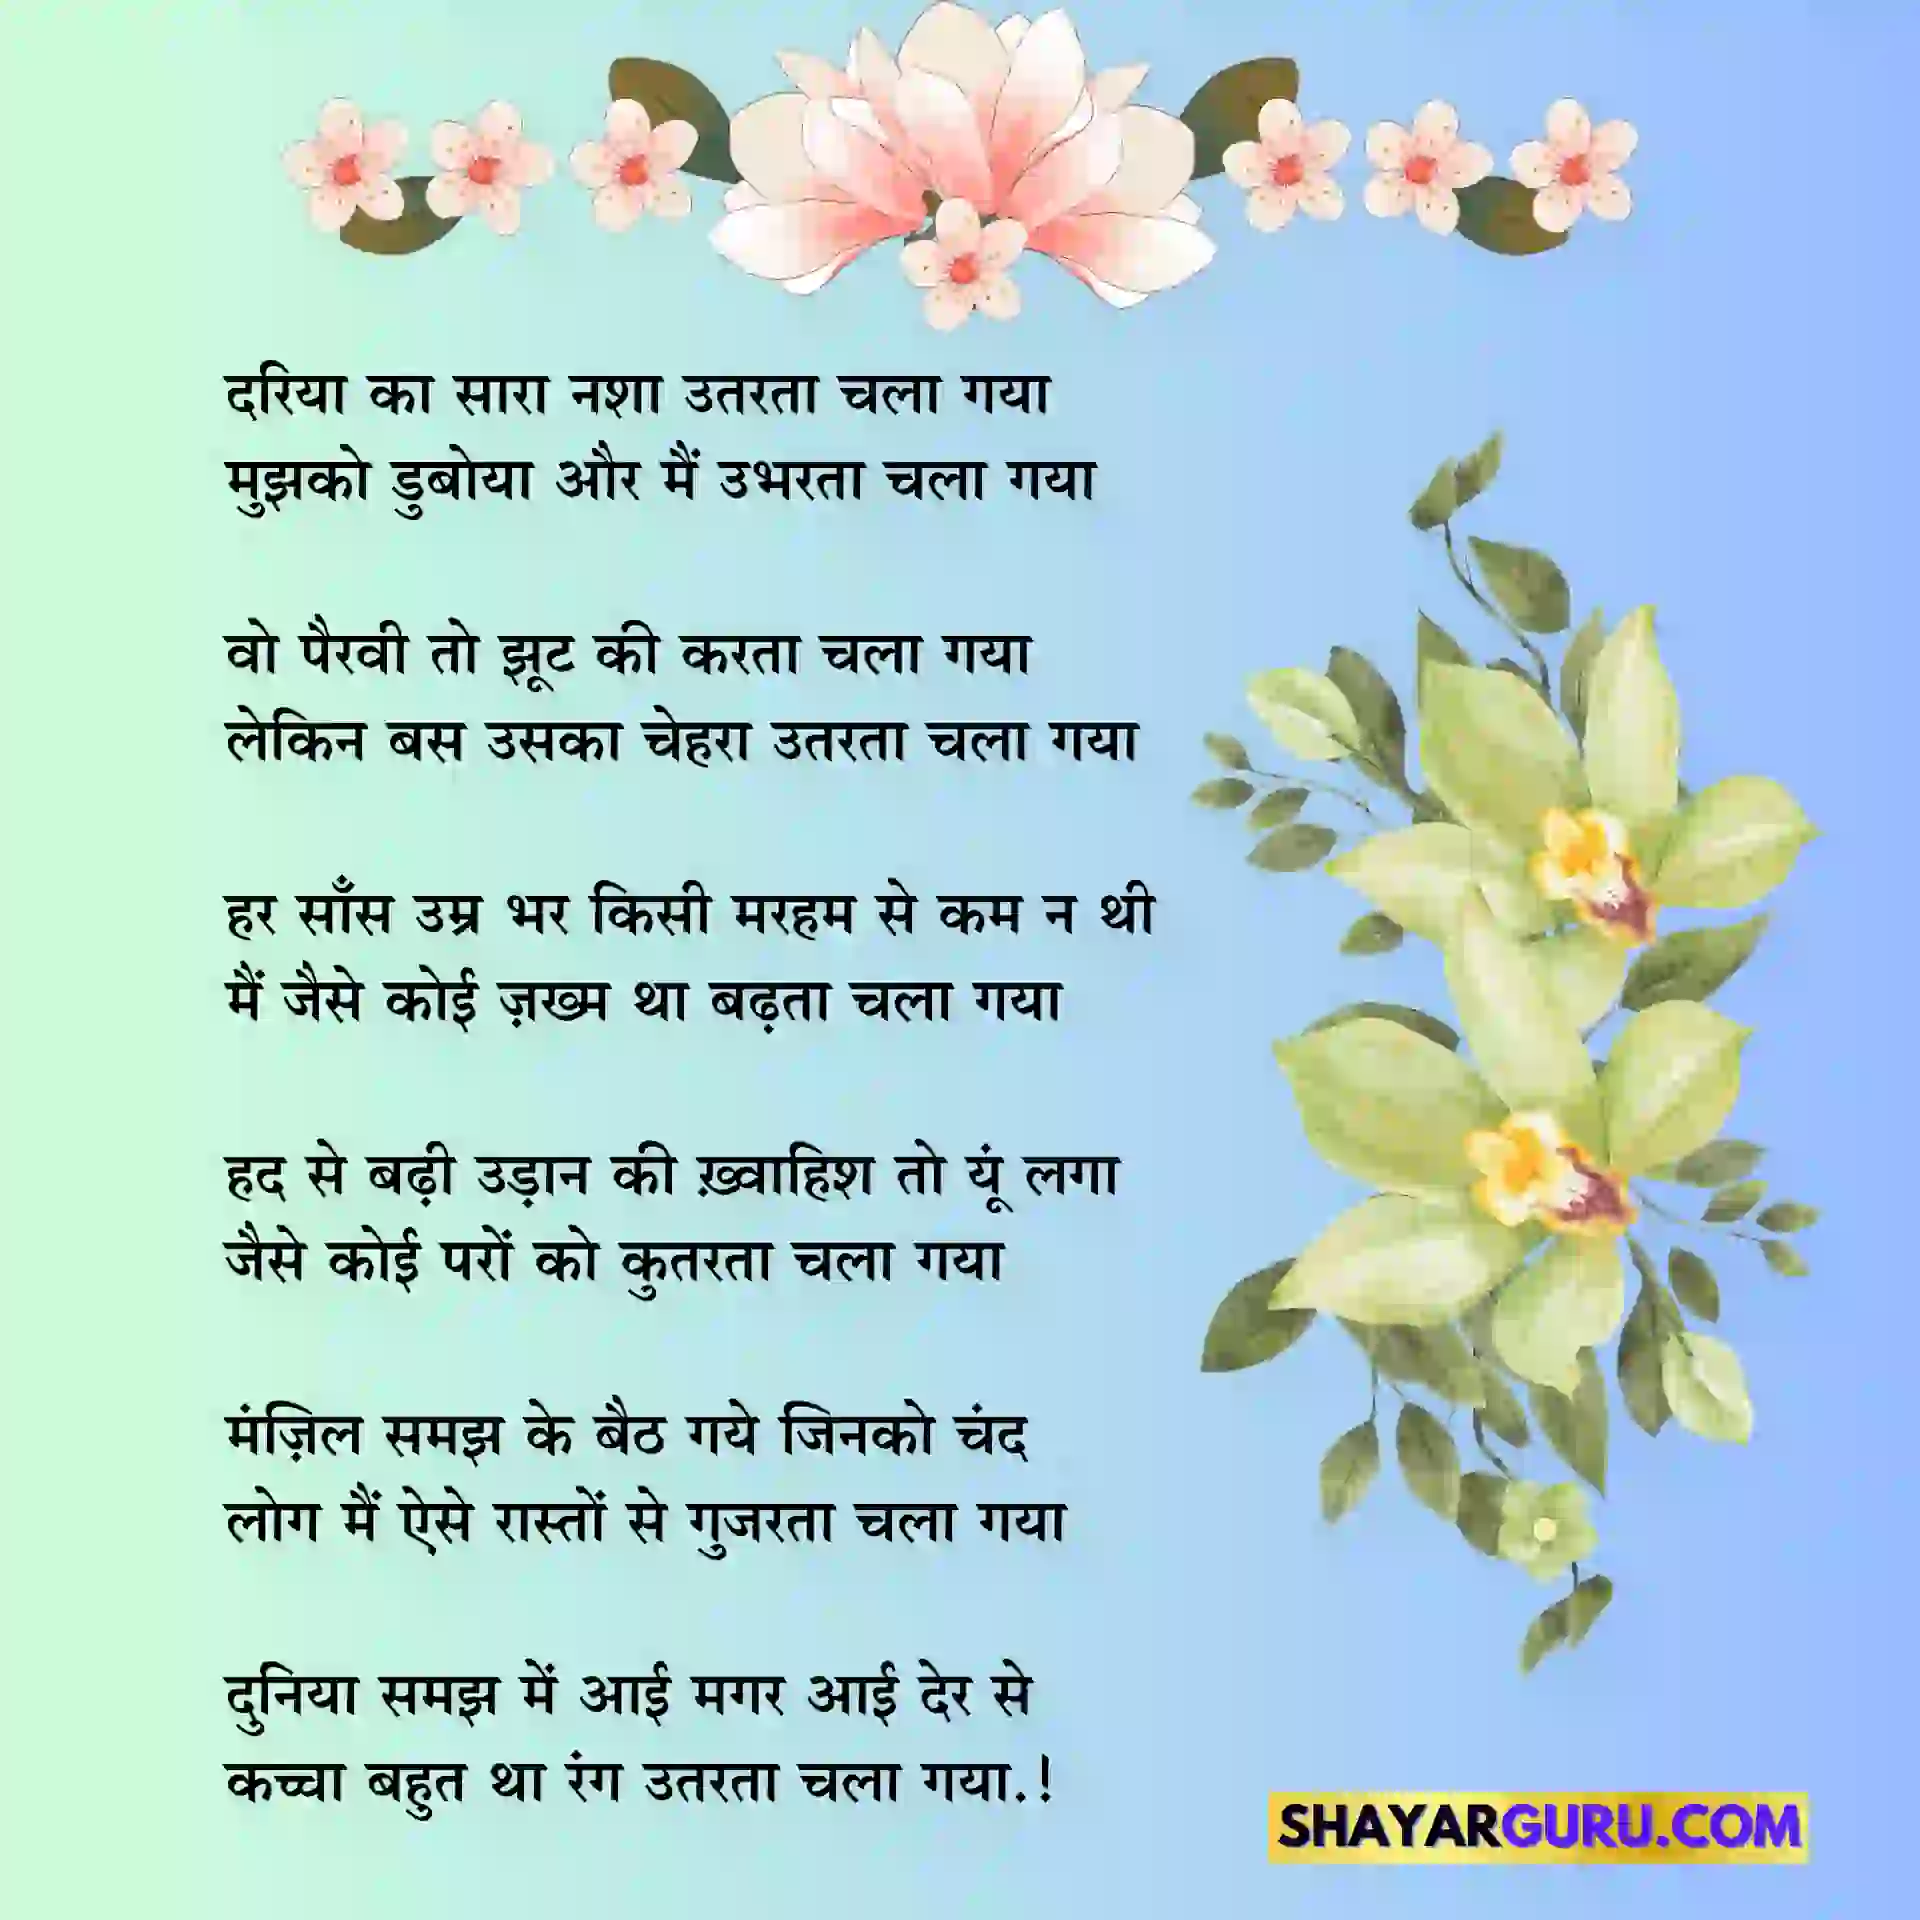 Poem on truth of life in hindi